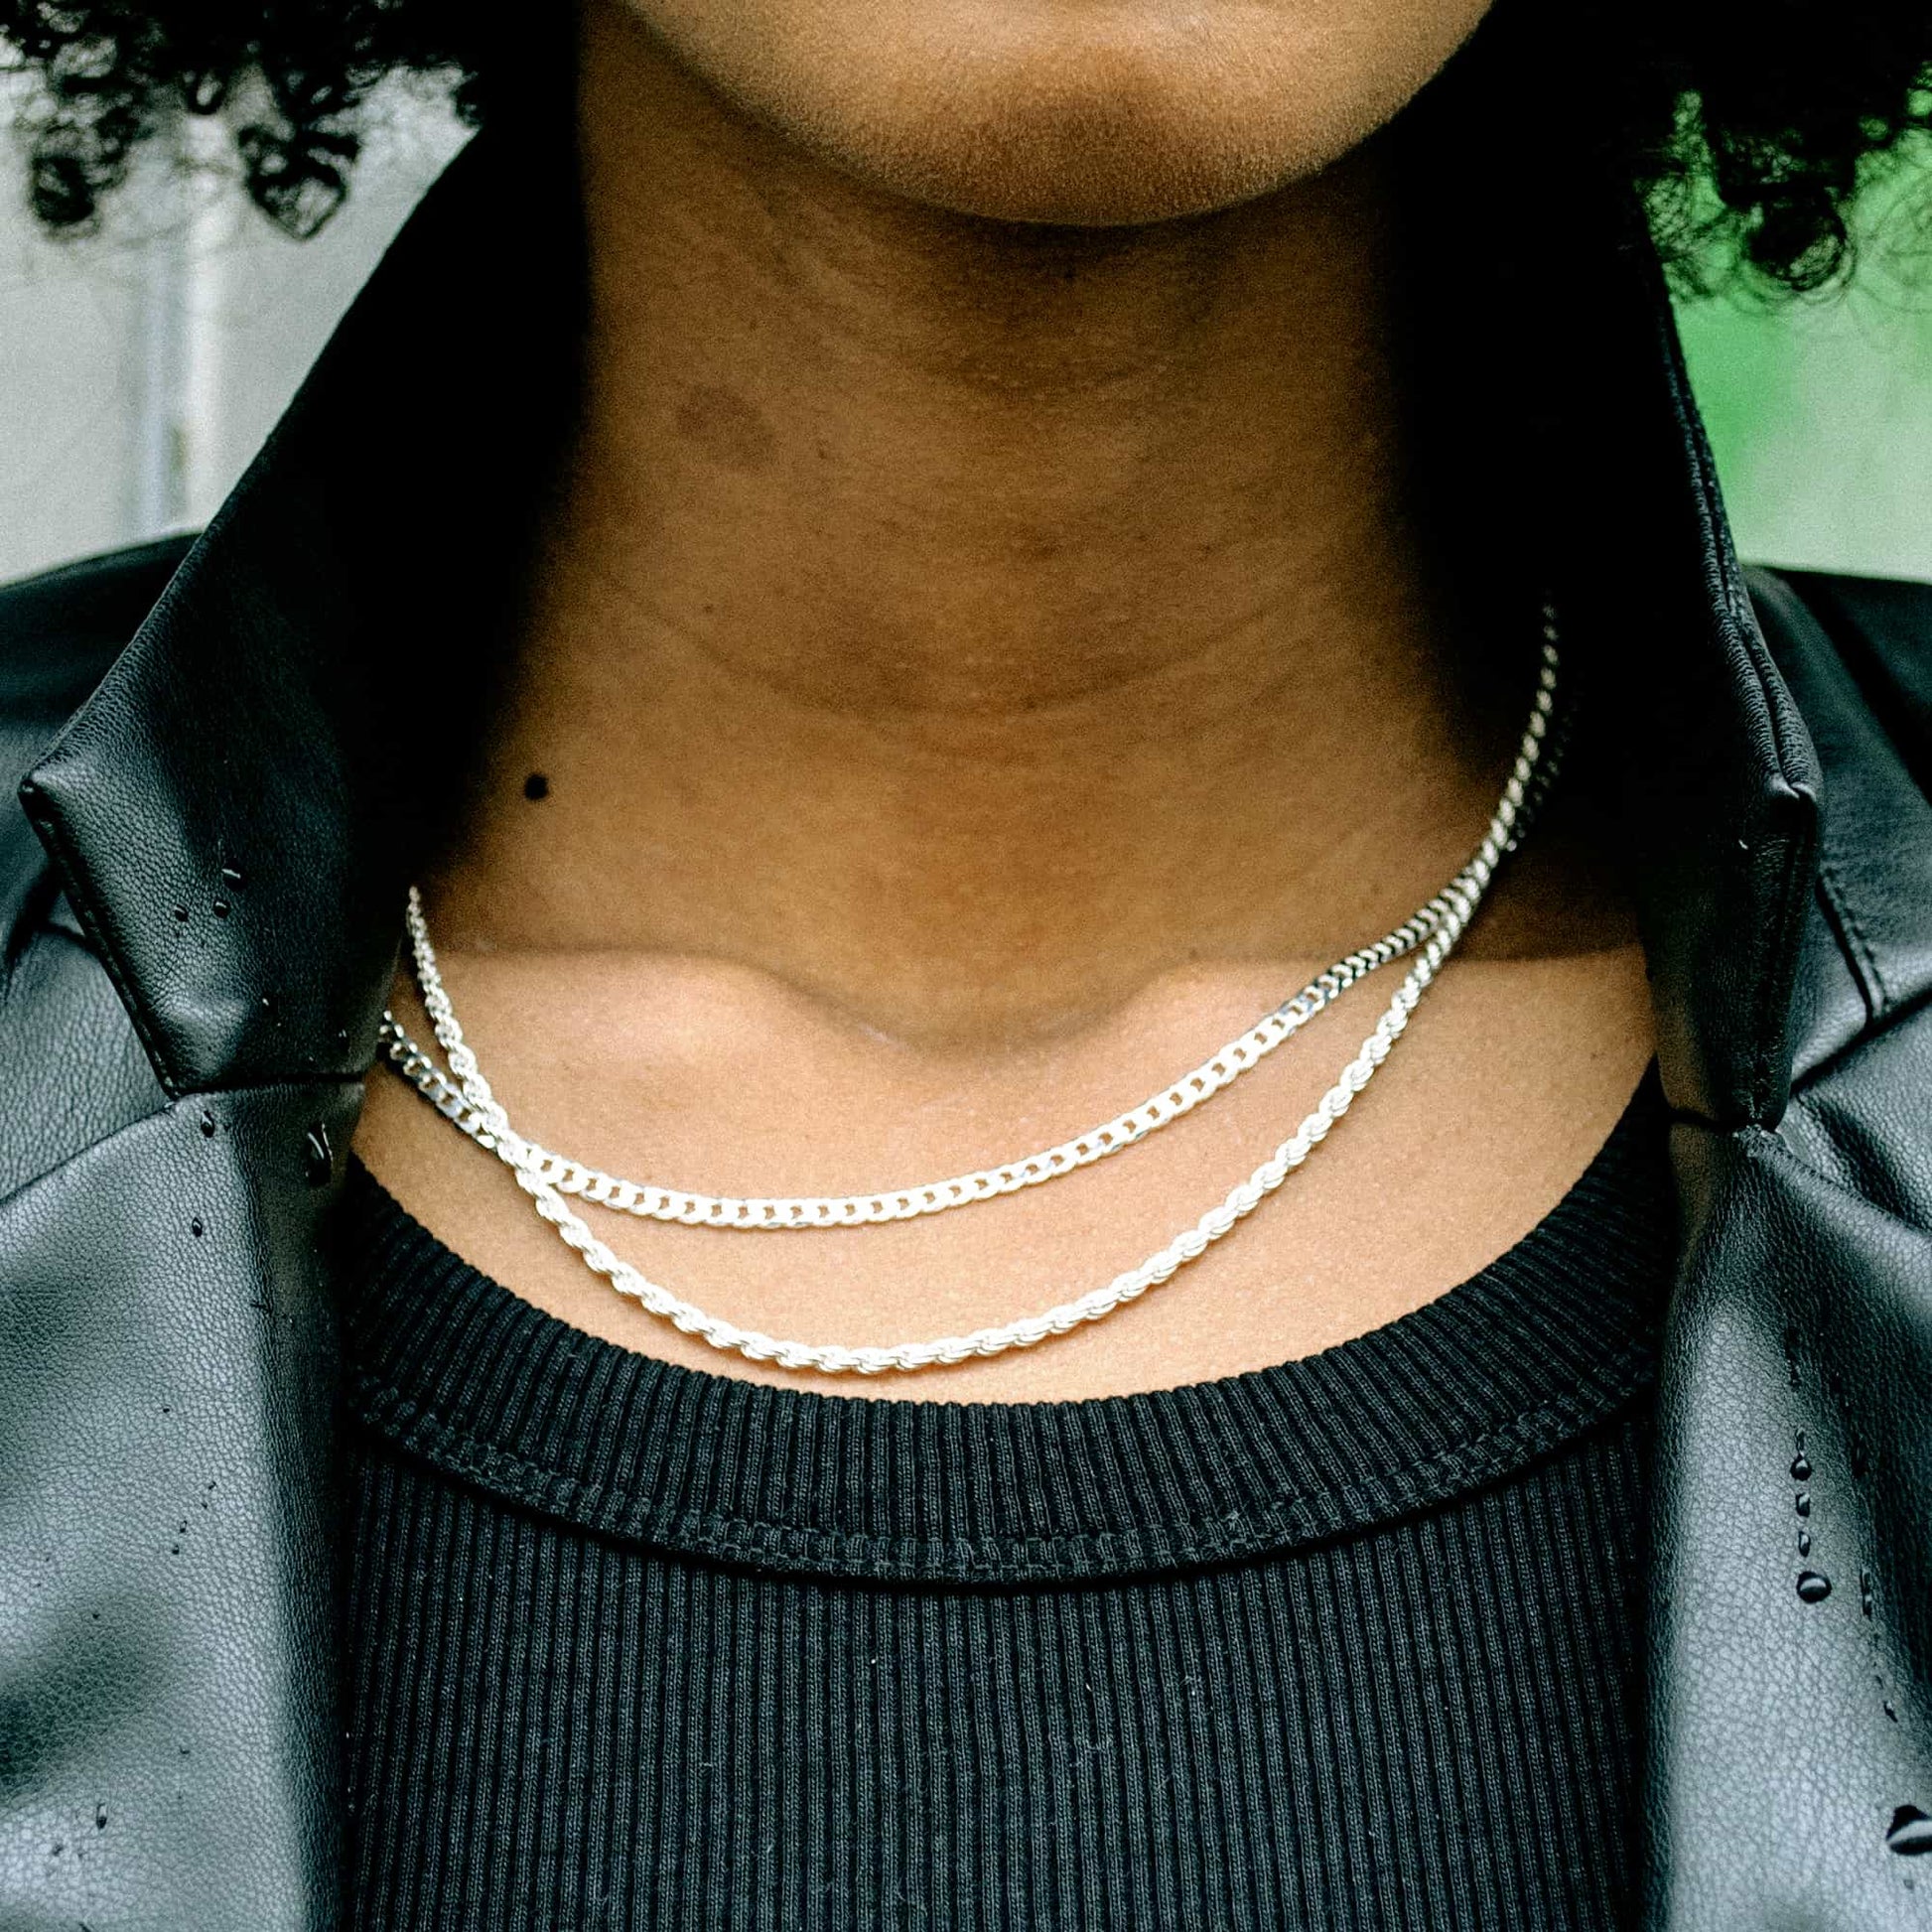 The Rope chain is an elegant and unisex piece of jewelry, crafted in Italy and made of 925 Sterling Silver. Every jewelry is designed by Atelier Domingo's in France and is made to be worn by both men and women.